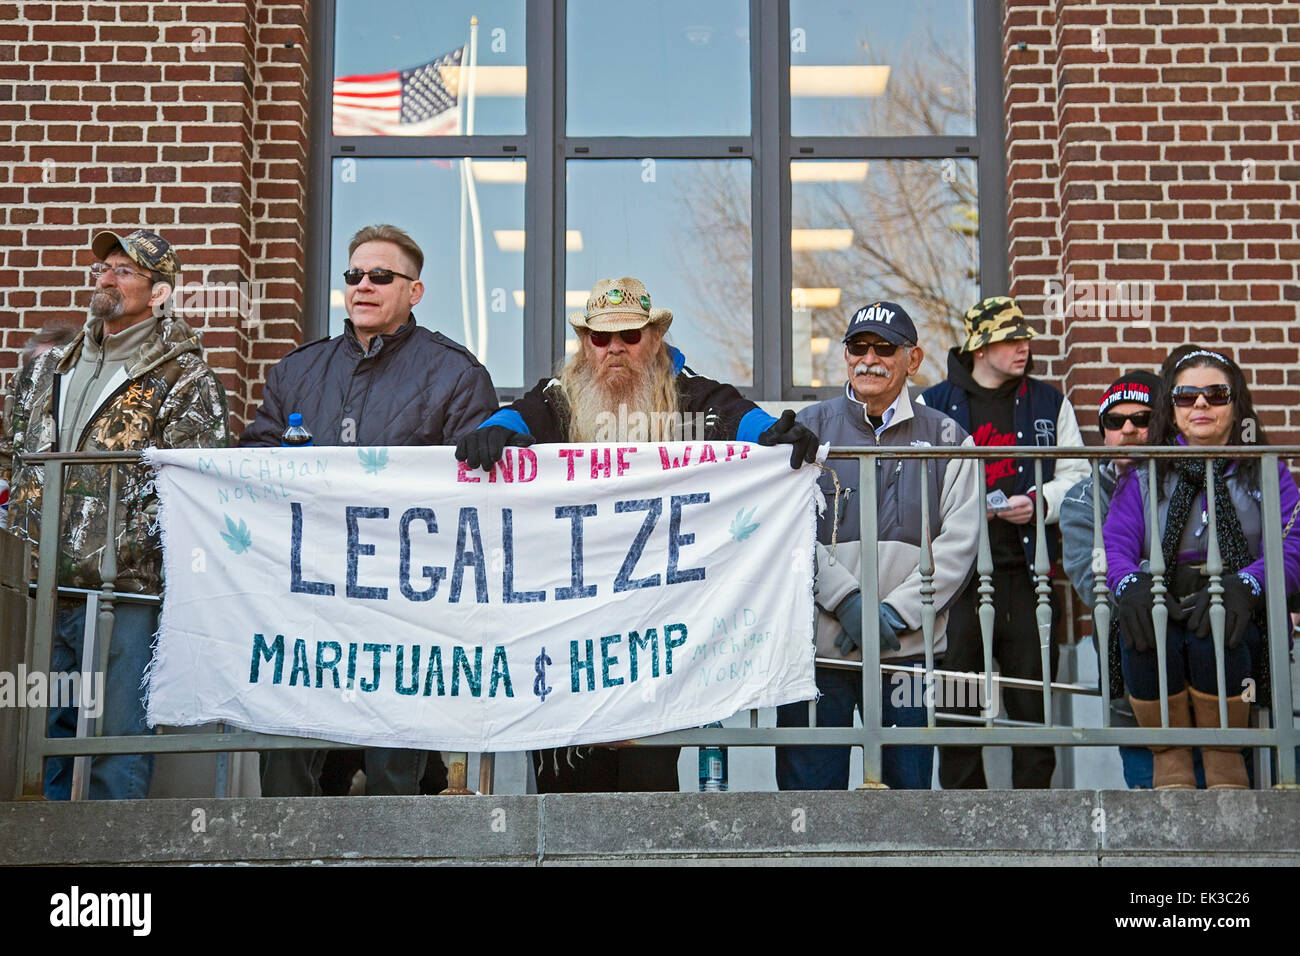 The annual Hash Bash at the University of Michigan, where a lot of marijuana is smoked and speakers call for its legalization. Stock Photo